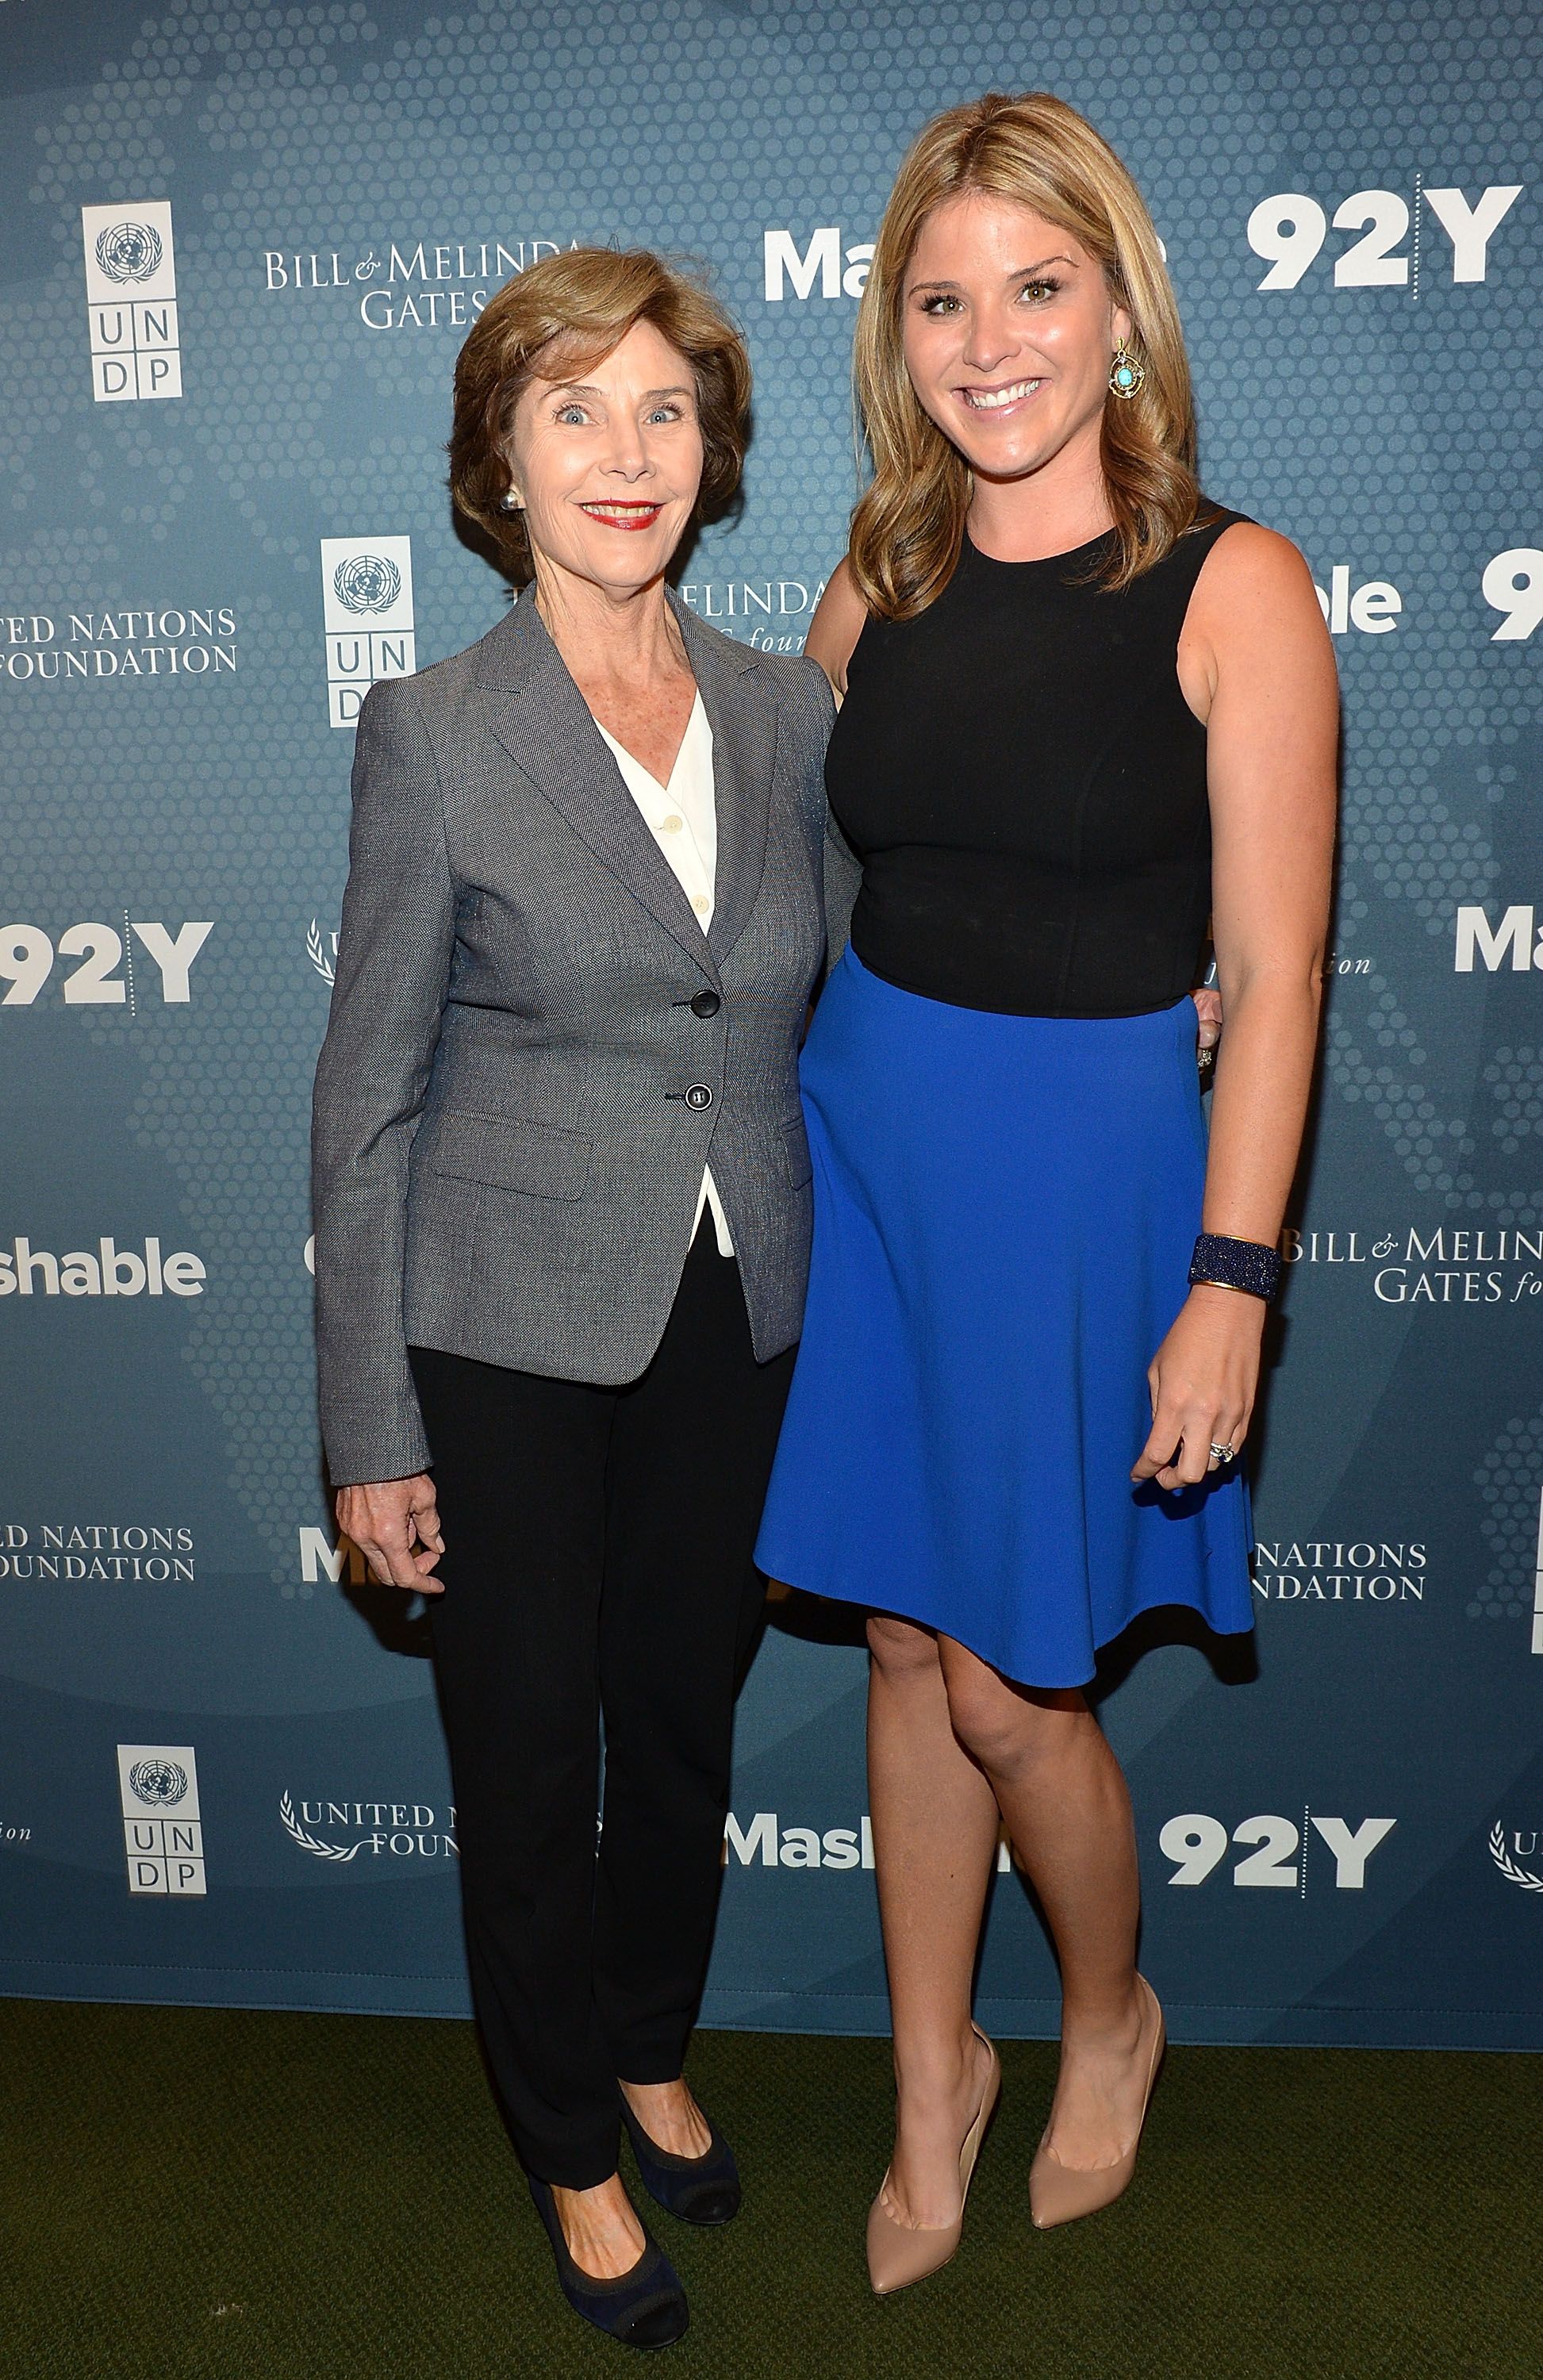 Laura Bush and daughter author Jenna Bush Hager attend the 2014 Social Good Summit in 2014. | Source: Slaven Vlasic/Getty Images